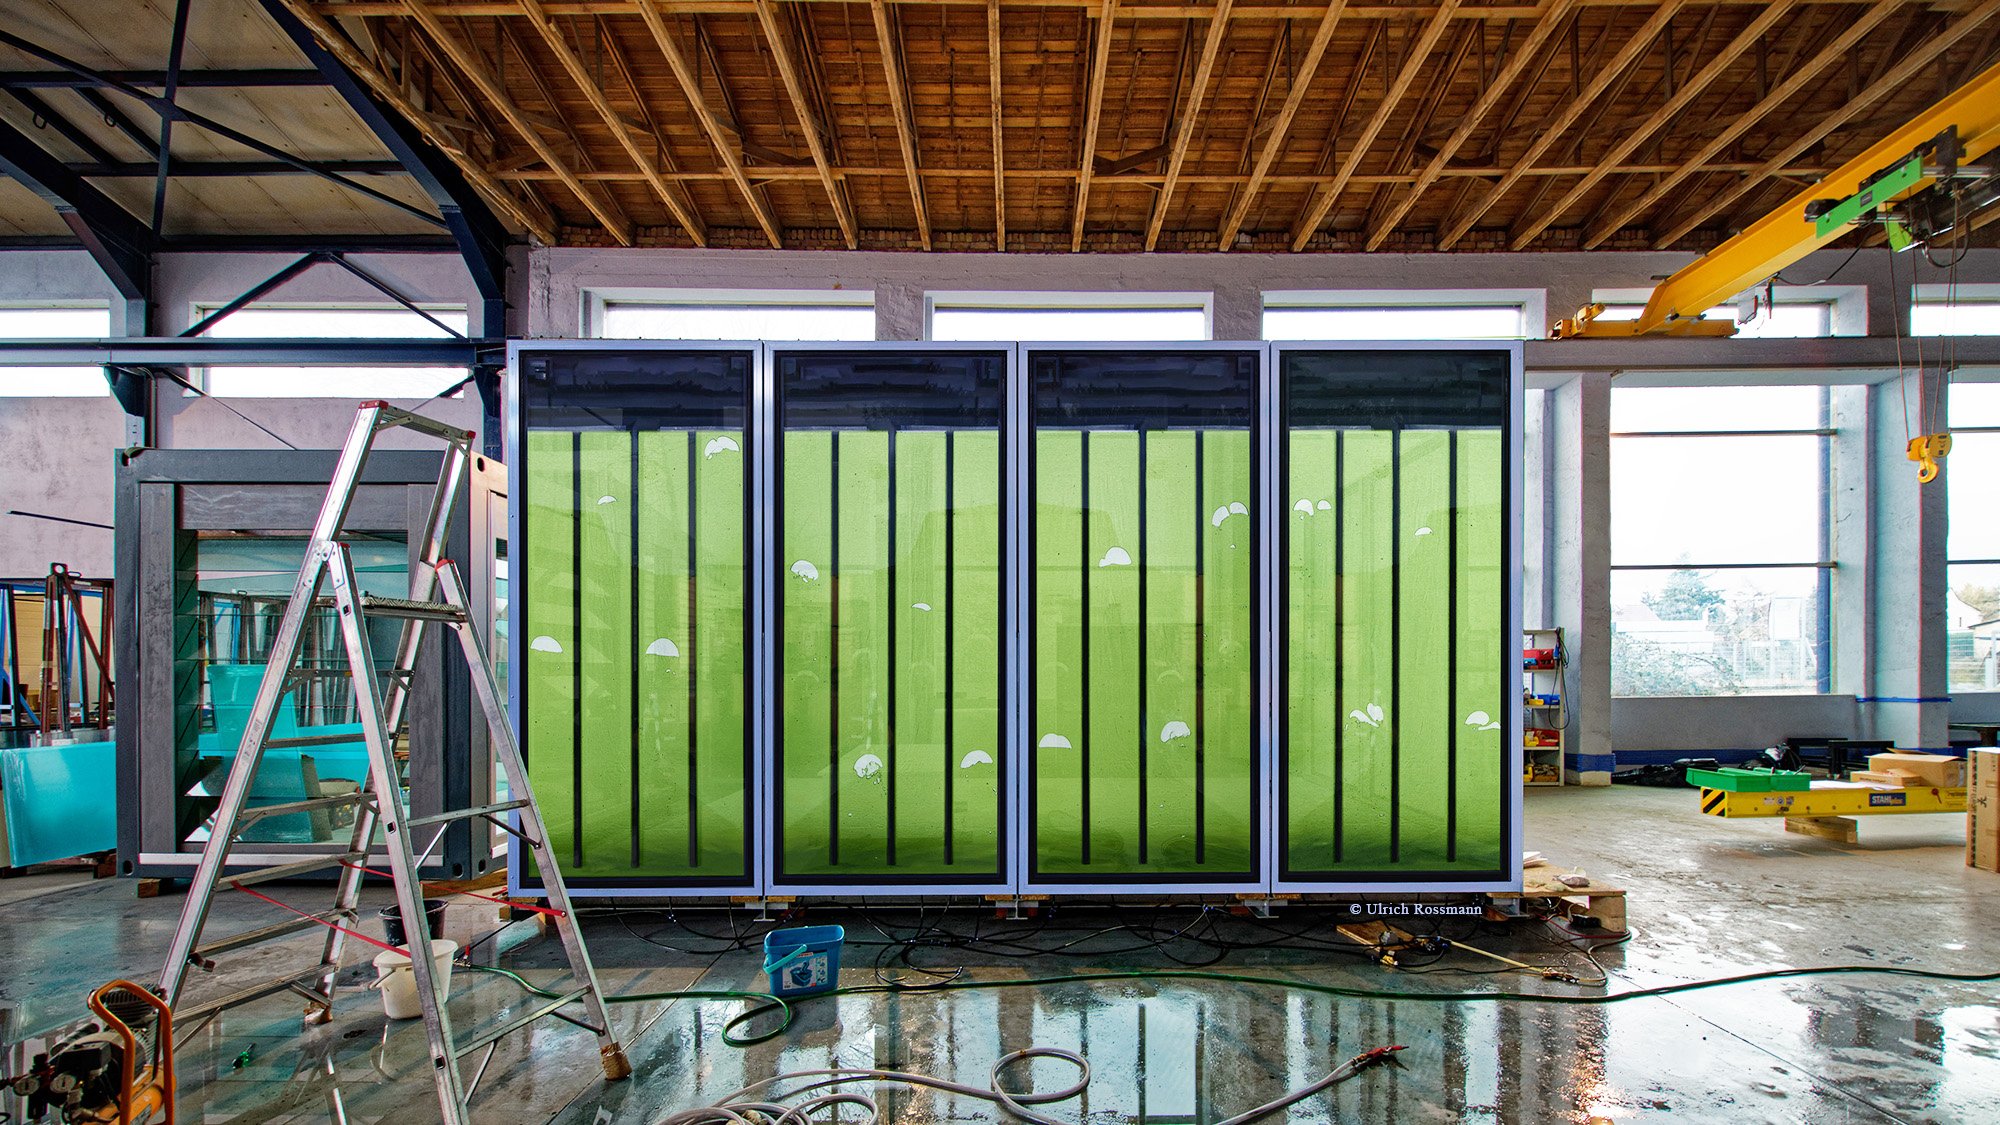 The glass elements of the bioenergy façade are part of a solar thermal system with which additional microalgae are cultivated to build up biomass and absorb C02.